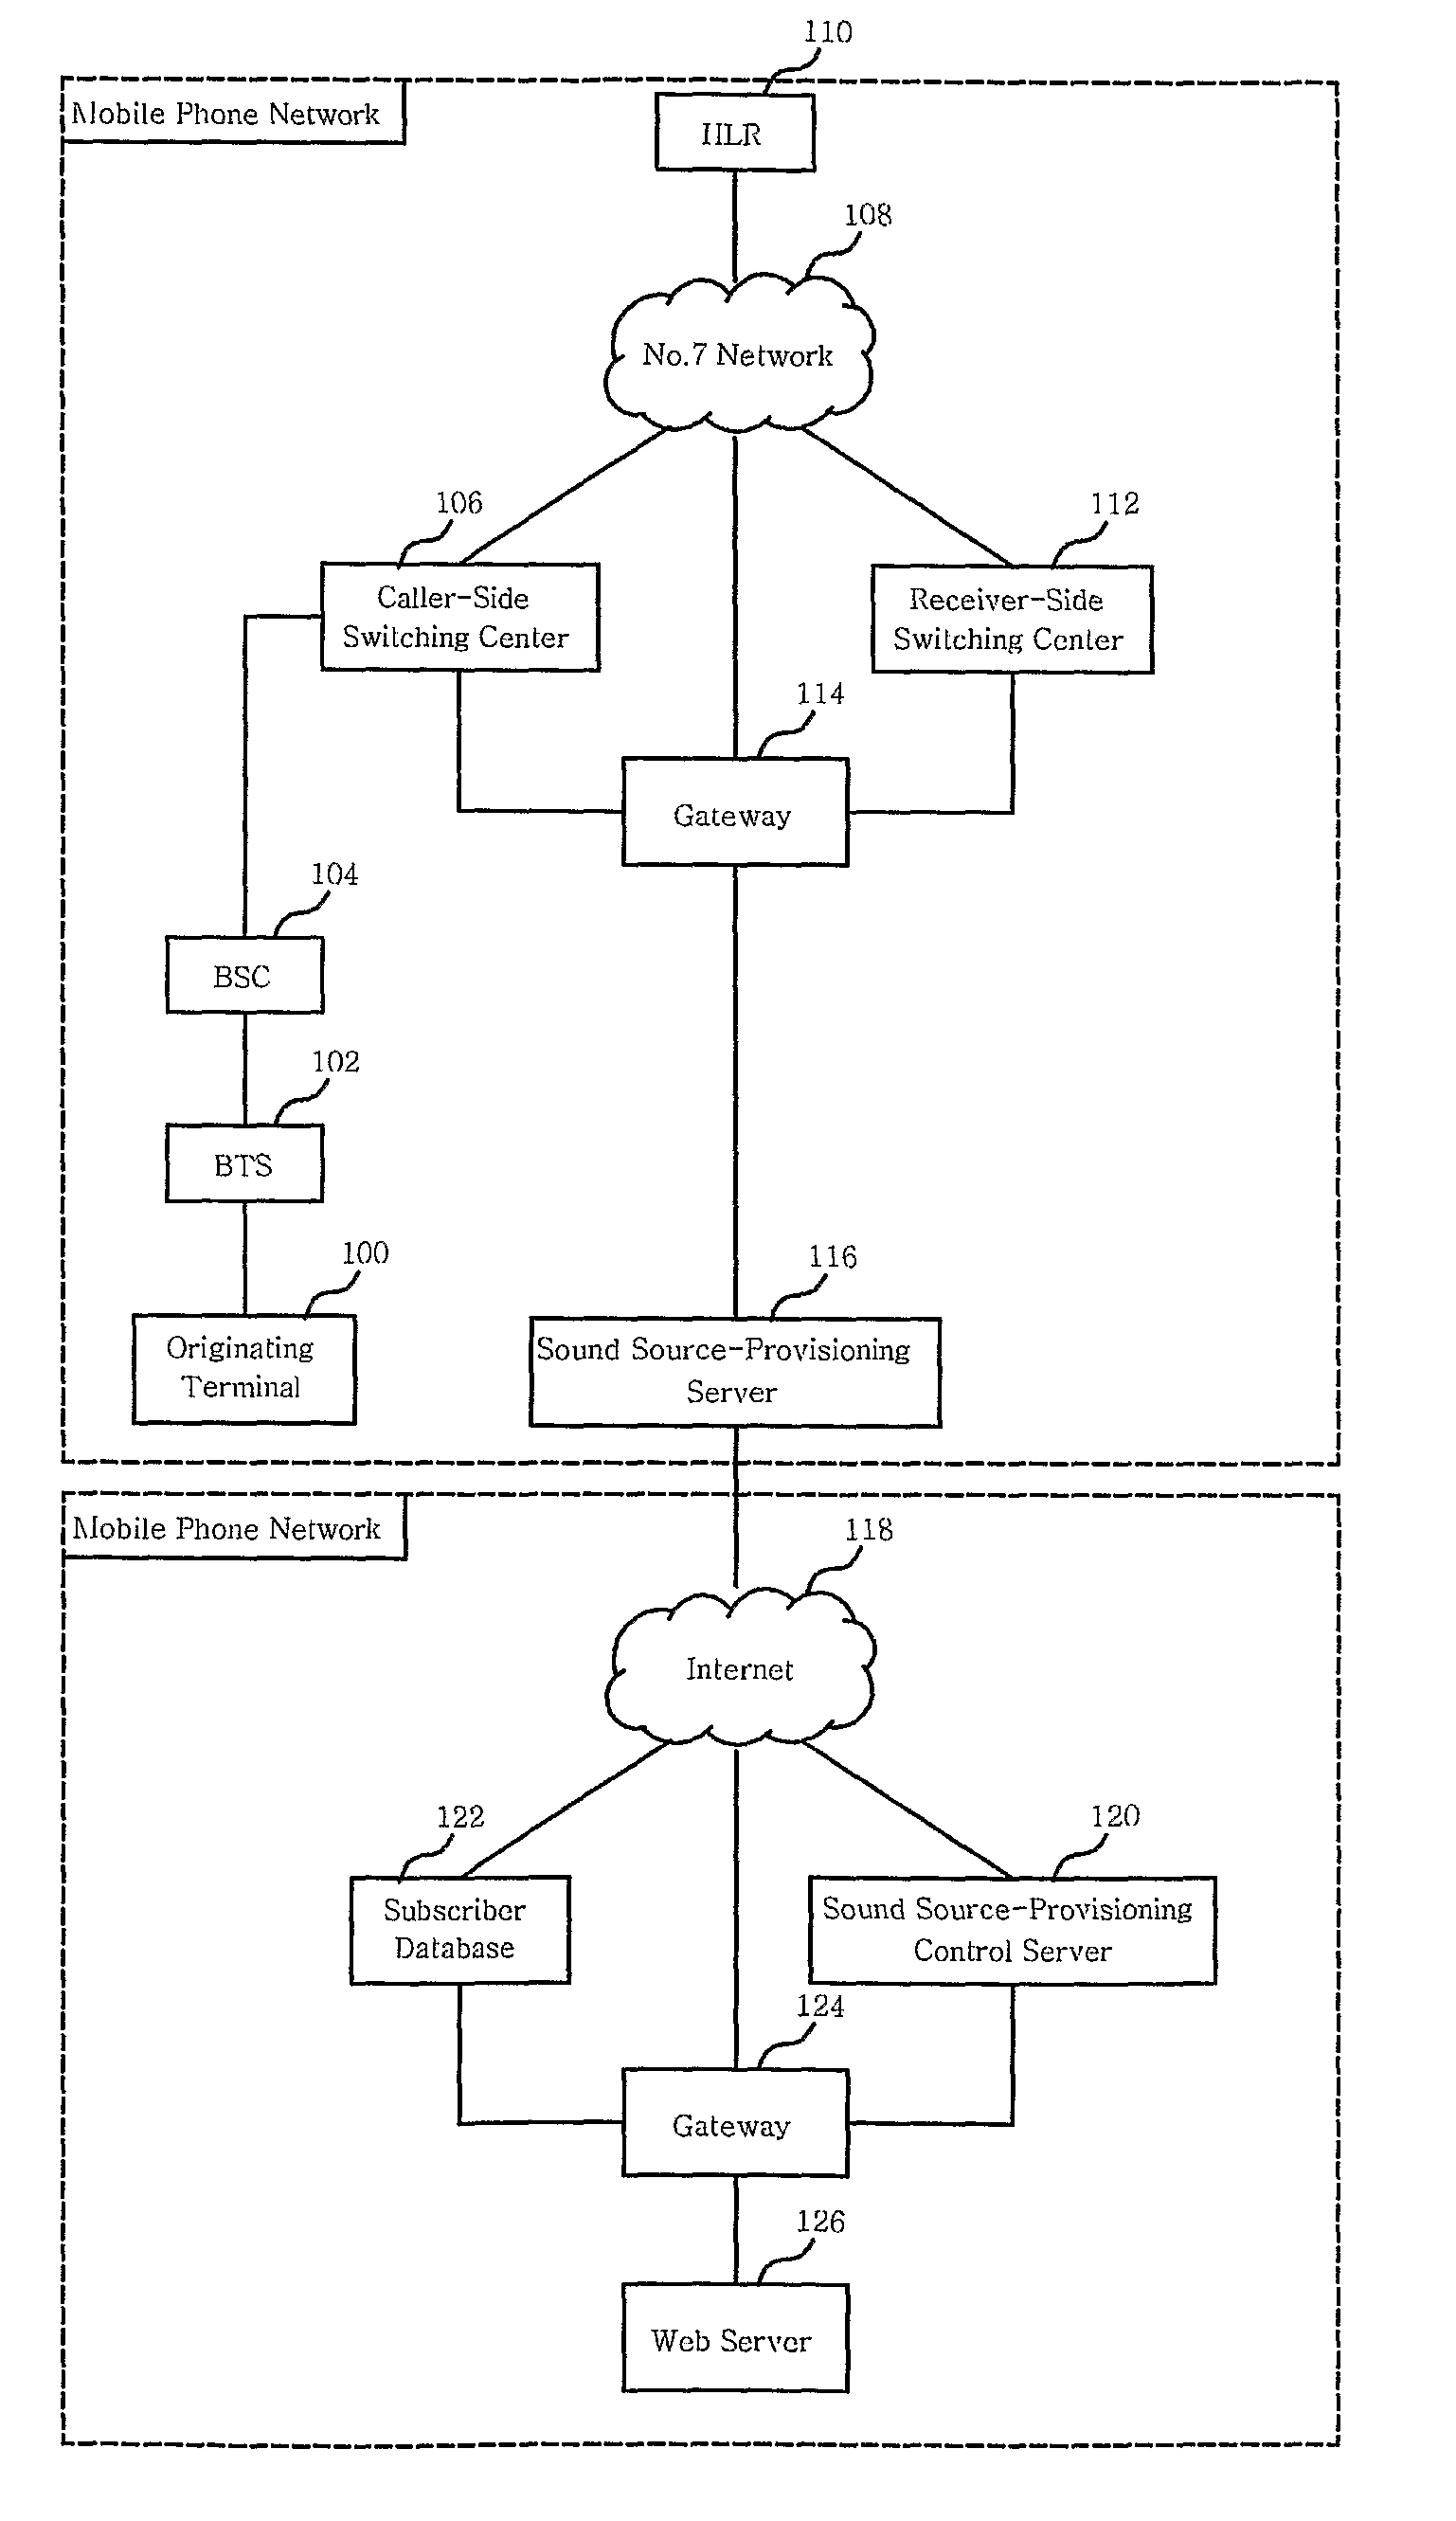 Method and System for Providing Multimedia Ring Back Tone Service by Using Call-Side Switching Center